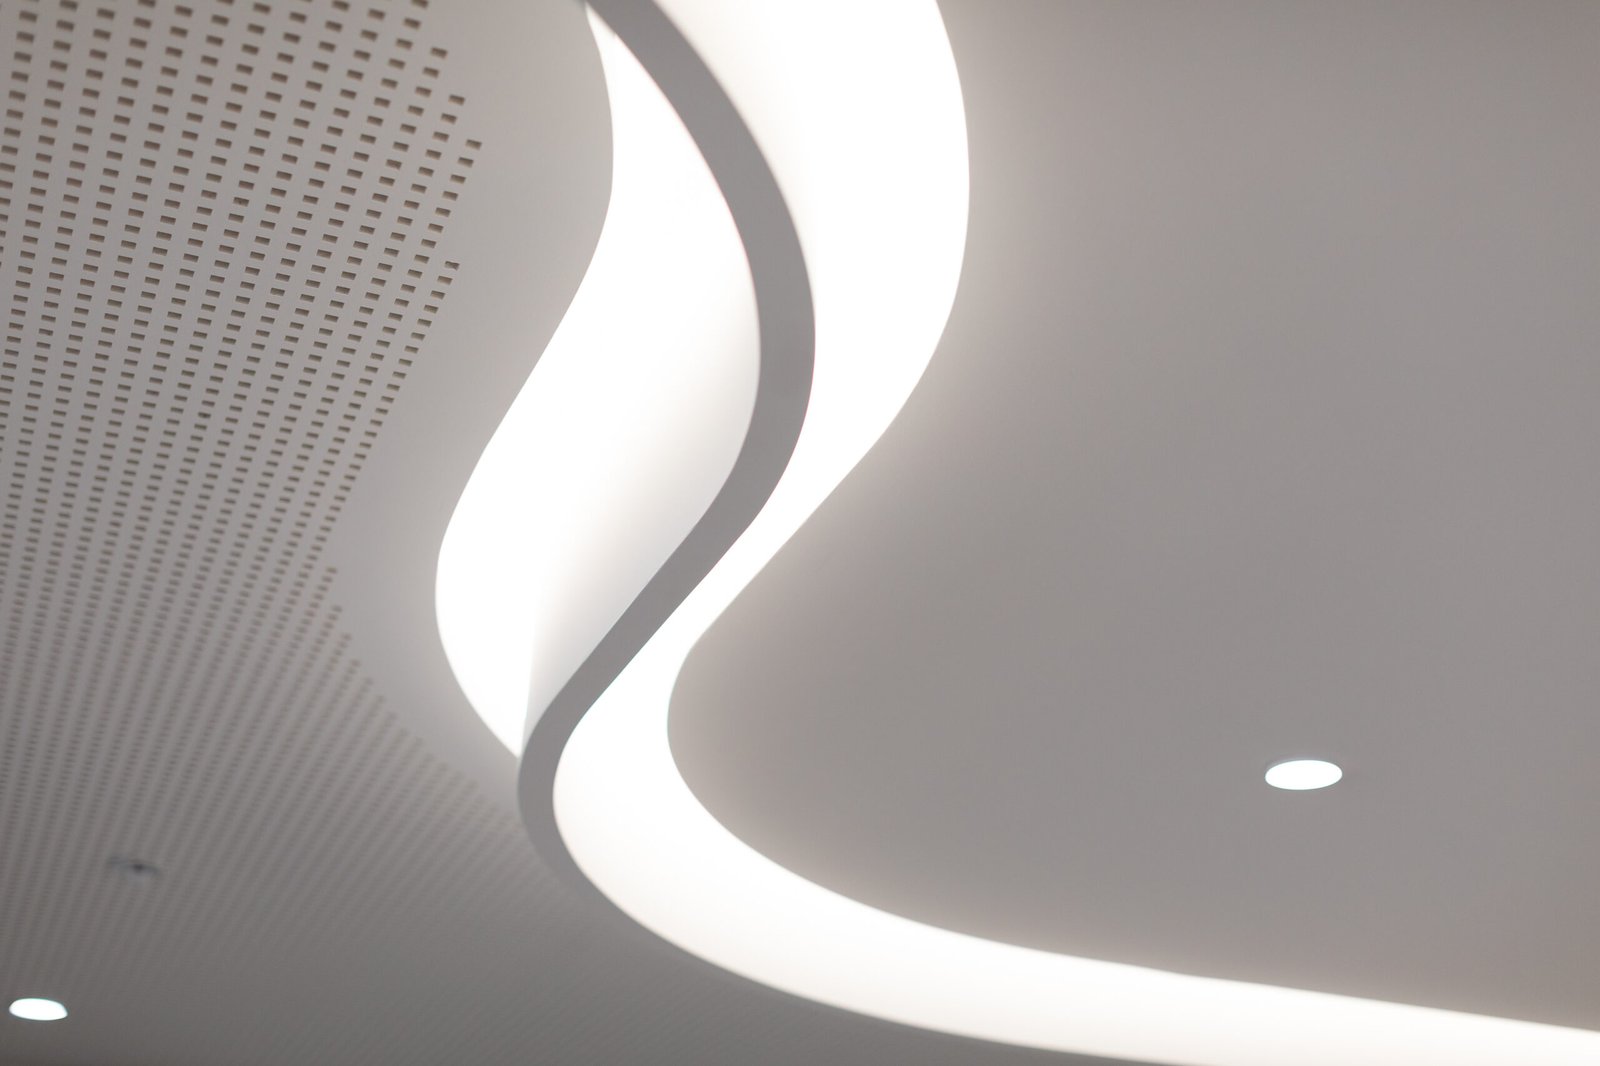 Lighting Design in the Workplace